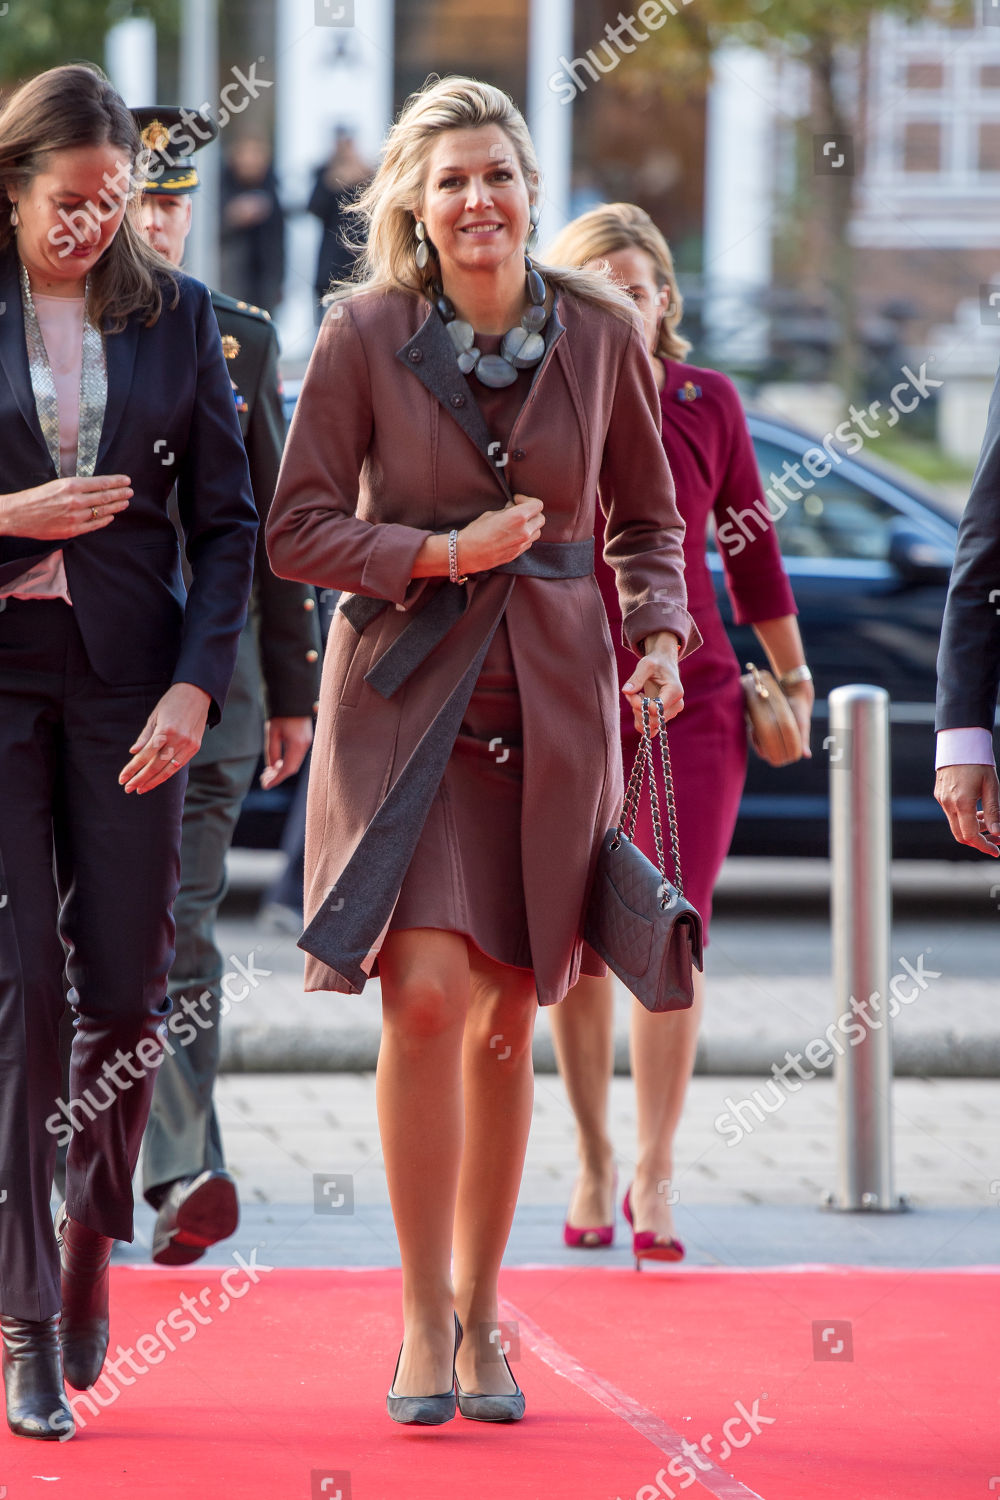 queen-maxima-visit-to-113-suicide-prevention-amsterdam-the-netherlands-shutterstock-editorial-9958871f.jpg